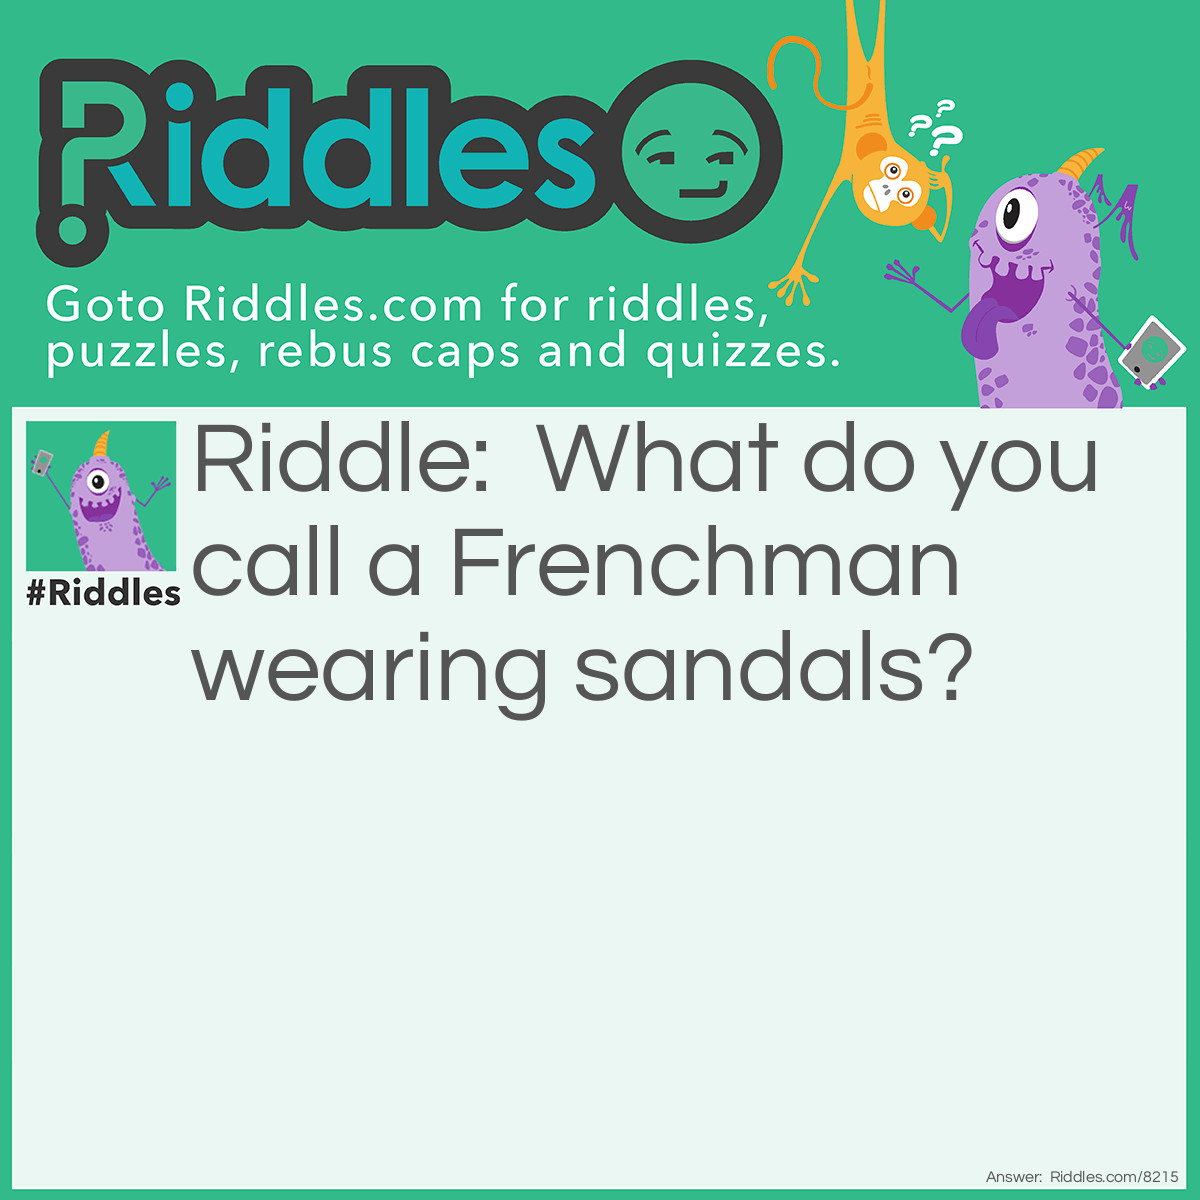 Riddle: What do you call a Frenchman wearing sandals? Answer: Phillipe Phillope.